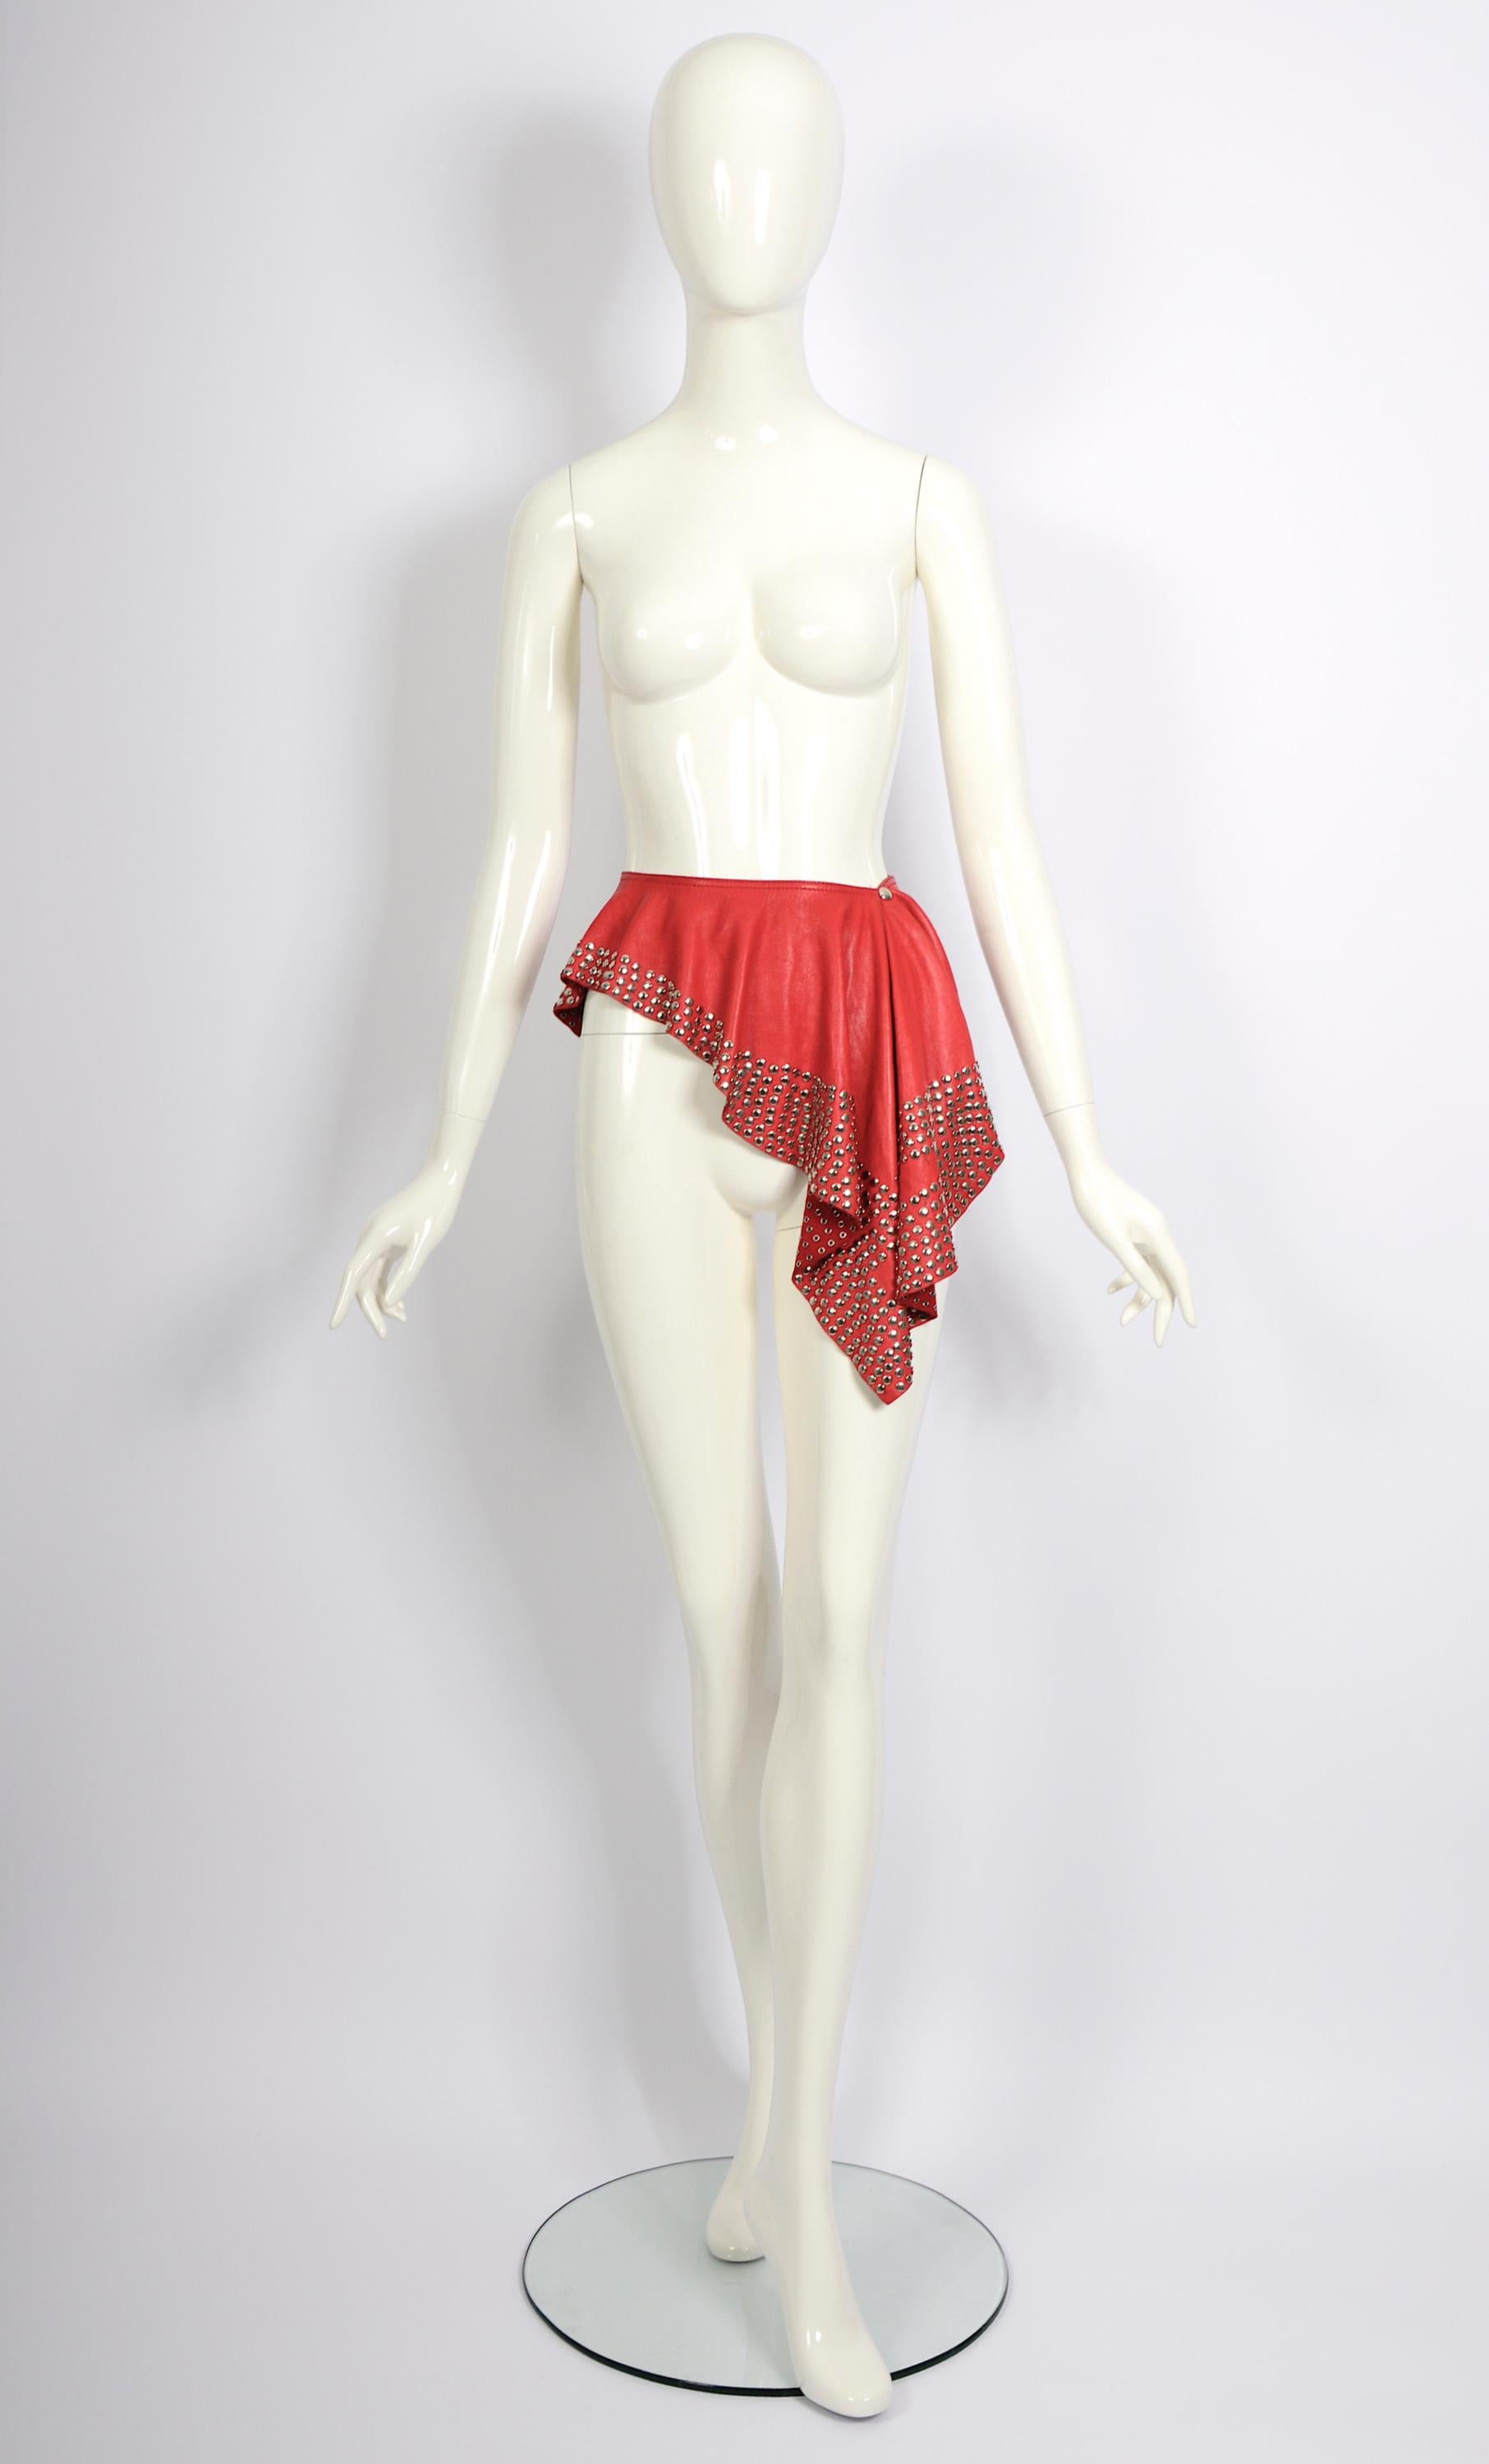 Azzedine Alaia circa 1981 collectors studded embellished red leather belt skirt For Sale 8